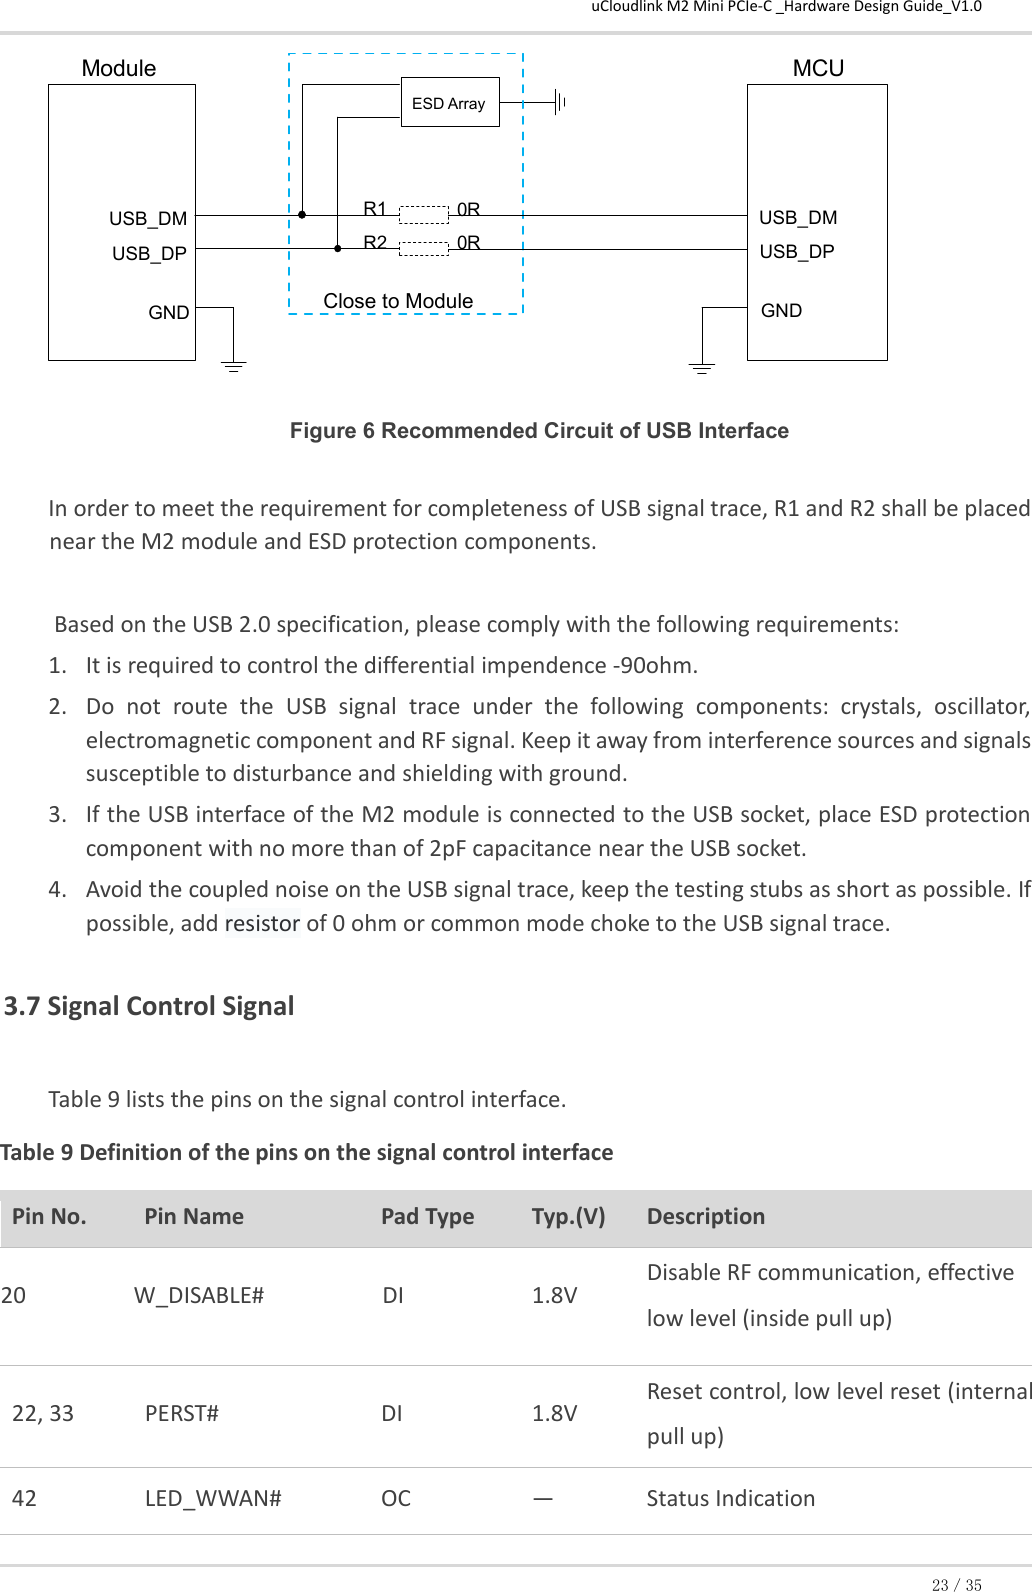 uCloudlink M2 Mini PCIe-C _Hardware Design Guide_V1.0 23／35   Figure 6 Recommended Circuit of USB Interface  In order to meet the requirement for completeness of USB signal trace, R1 and R2 shall be placed near the M2 module and ESD protection components.   Based on the USB 2.0 specification, please comply with the following requirements: 1. It is required to control the differential impendence -90ohm. 2. Do  not  route  the  USB  signal  trace  under  the  following  components:  crystals,  oscillator, electromagnetic component and RF signal. Keep it away from interference sources and signals susceptible to disturbance and shielding with ground. 3. If the USB interface of the M2 module is connected to the USB socket, place ESD protection component with no more than of 2pF capacitance near the USB socket.  4. Avoid the coupled noise on the USB signal trace, keep the testing stubs as short as possible. If possible, add resistor of 0 ohm or common mode choke to the USB signal trace.  3.7 Signal Control Signal Table 9 lists the pins on the signal control interface. Table 9 Definition of the pins on the signal control interface Pin No.  Pin Name Pad Type  Typ.(V)  Description 20  W_DISABLE#  DI  1.8V  Disable RF communication, effective low level (inside pull up)  22, 33  PERST#  DI  1.8V Reset control, low level reset (internal pull up)  42  LED_WWAN#  OC  — Status Indication  USB_DP USB_DM GND USB_DP USB_DM GND R1 R2 Close to Module ESD Array R 0 0 R Module MCU 